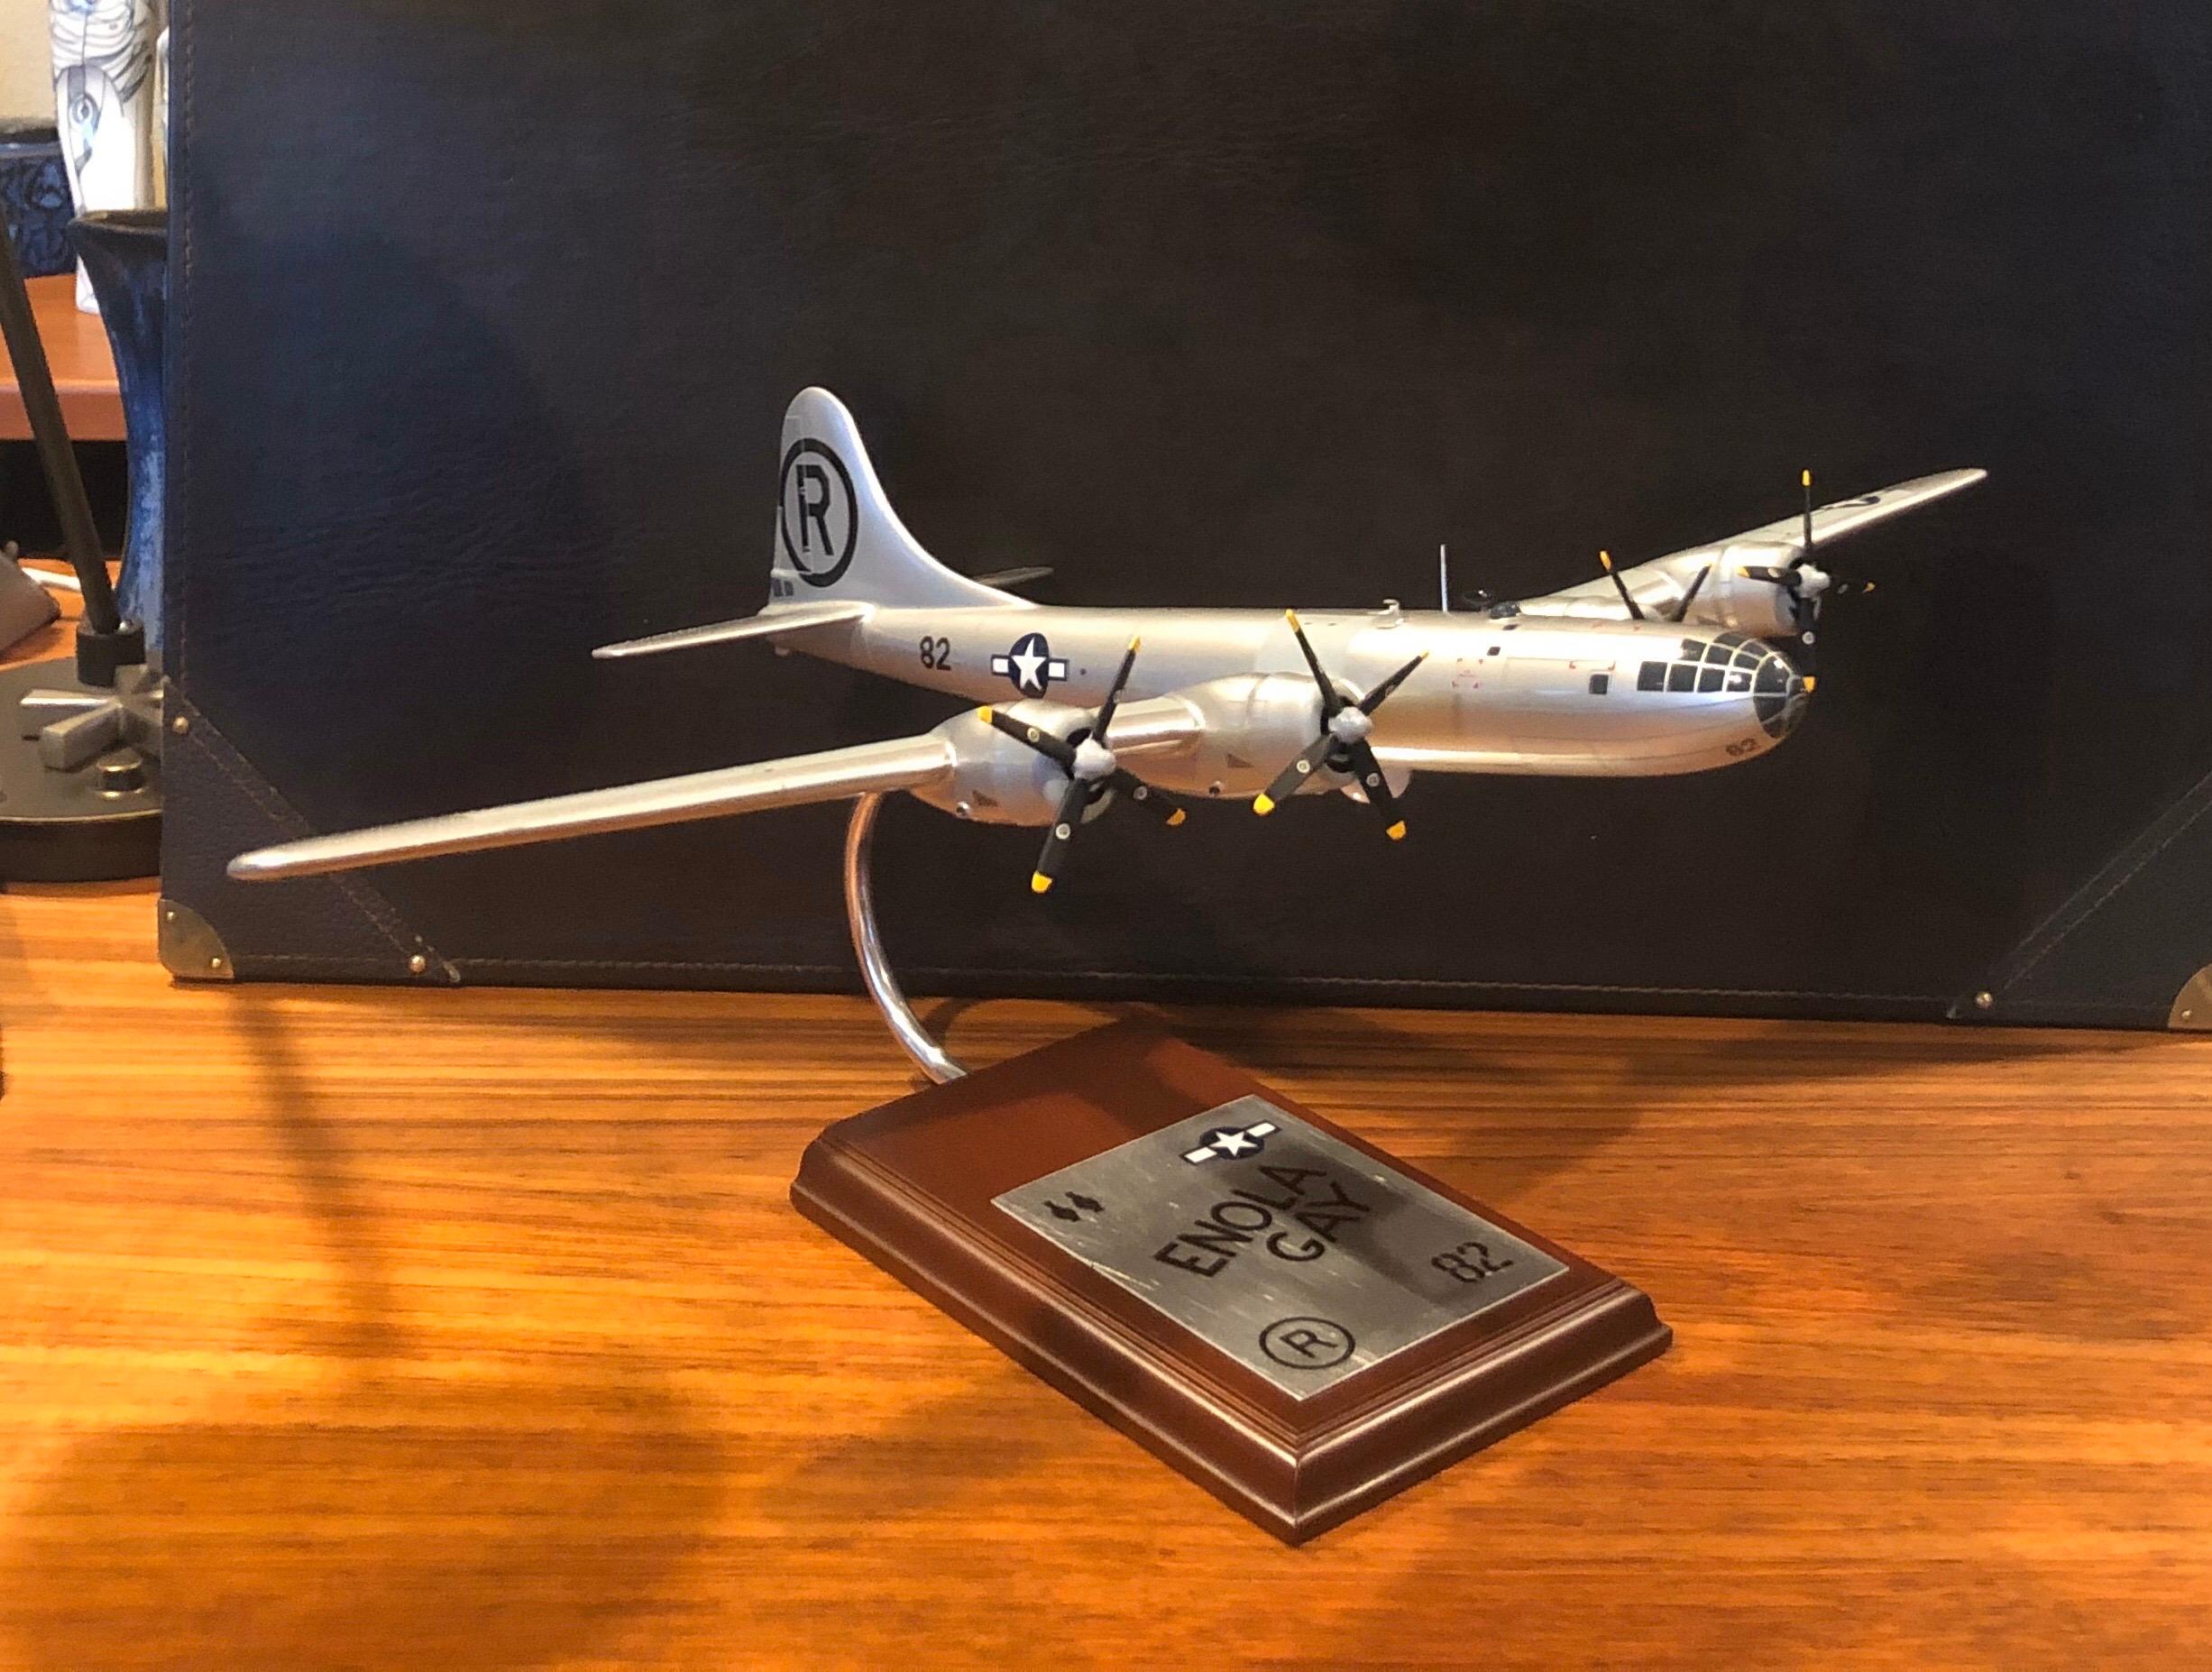 Superbly detailed Enola Gay B-29 Boeing super fortress bomber model signed by navigator Dutch Van Kirk, circa 2000s. The Enola Gay was named after Enola Gay Tibbets, the mother of the pilot, Colonel Paul Tibbets. On August 6, 1945, during the final